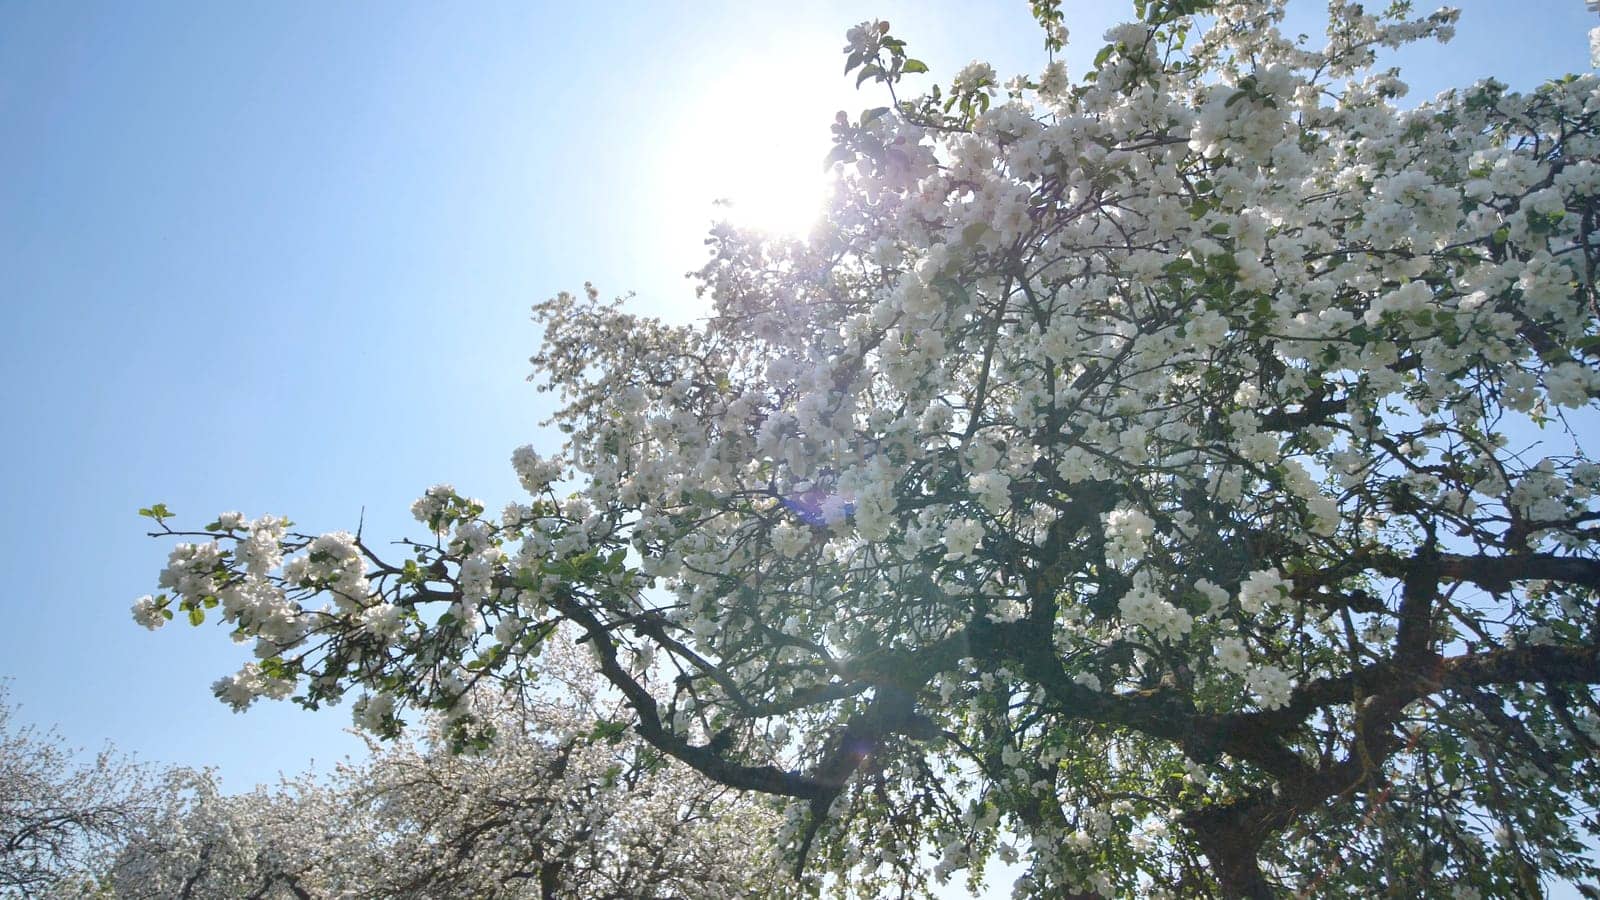 Flowering apple trees in the Russian village in May and the rays of the sun. Video in motion with the sounds of lively villages and birds. by DovidPro